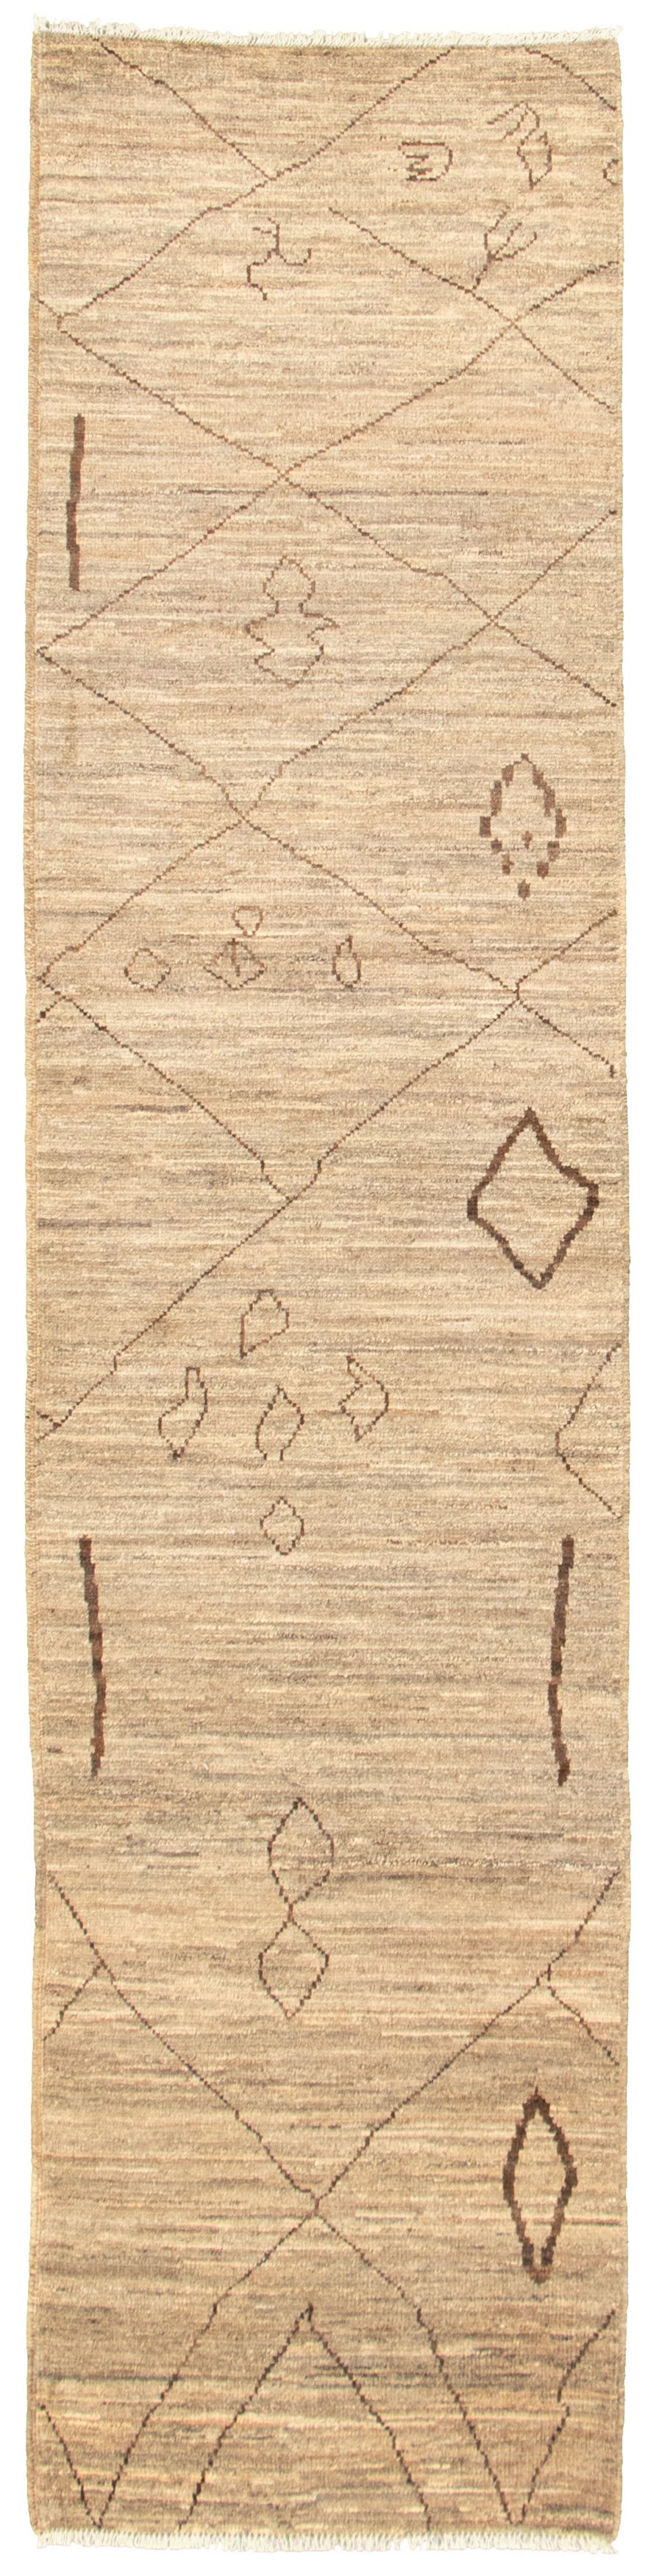 Hand-knotted Marrakech Grey, Tan Wool Rug 2'9" x 11'6" Size: 2'9" x 11'6"  